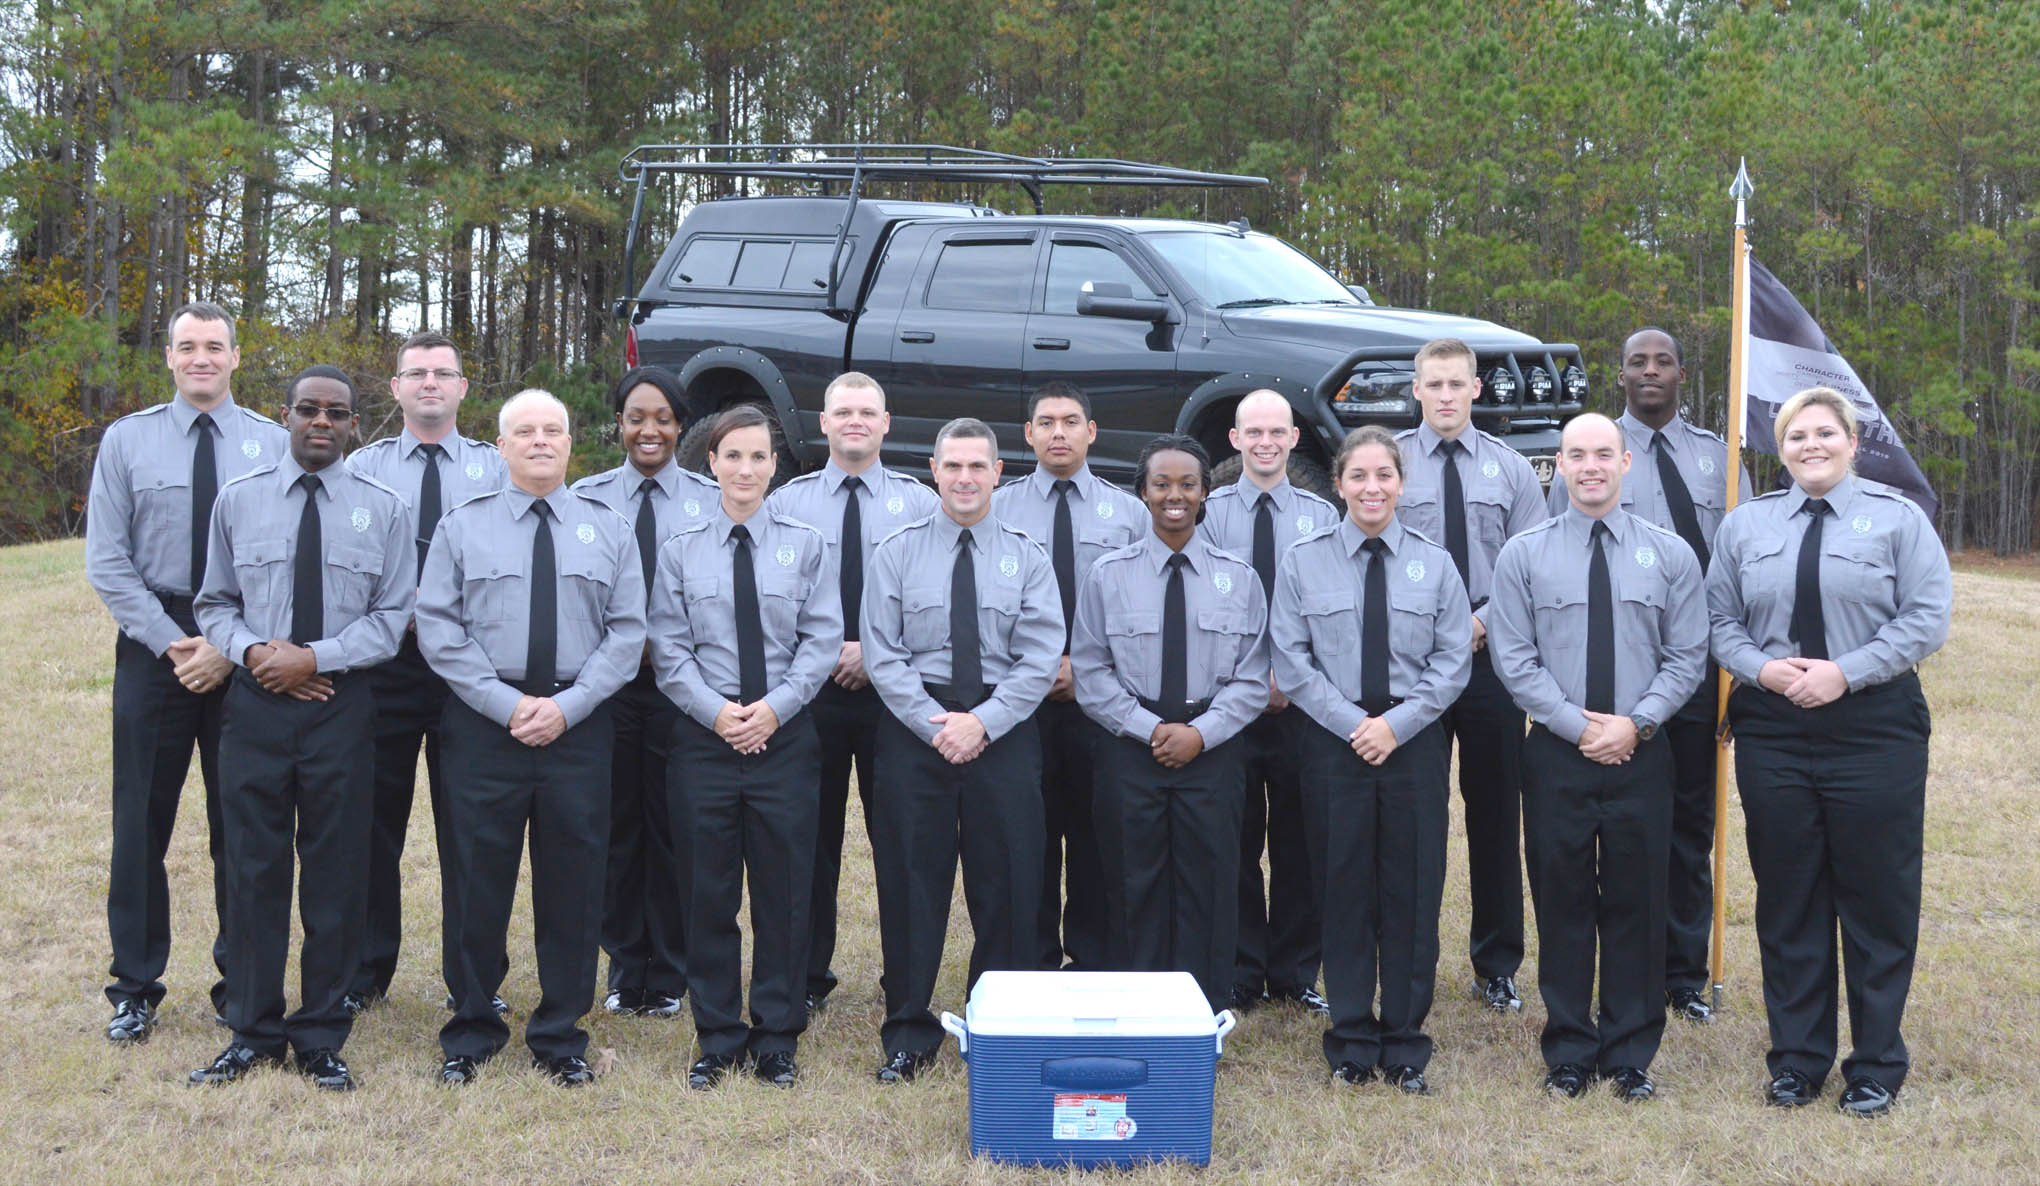 Click to enlarge,  Pictured are members of Central Carolina Community College's Basic Law Enforcement Training (BLET) Fall 2016 graduating class. Pictured are, left to right: first row, Demetrix Allen, David Schau, Mandy Leon, Robert Otis, Veronica Campbell, Jaime Rizzuto, Kristopher Higgins, and Kaitlin Shaver; second row, Class Capt. Robert Smith, Jacob Foil, Kamaria Hooker, Shawn Cronin, Ivan Rincon, Alexander Bennett, Donald Dunlap, and William Brown. For more information about the college's BLET program, visit www.cccc.edu/blet or contact Robert Powell at rpowell@cccc.edu or 919-777-7774. 